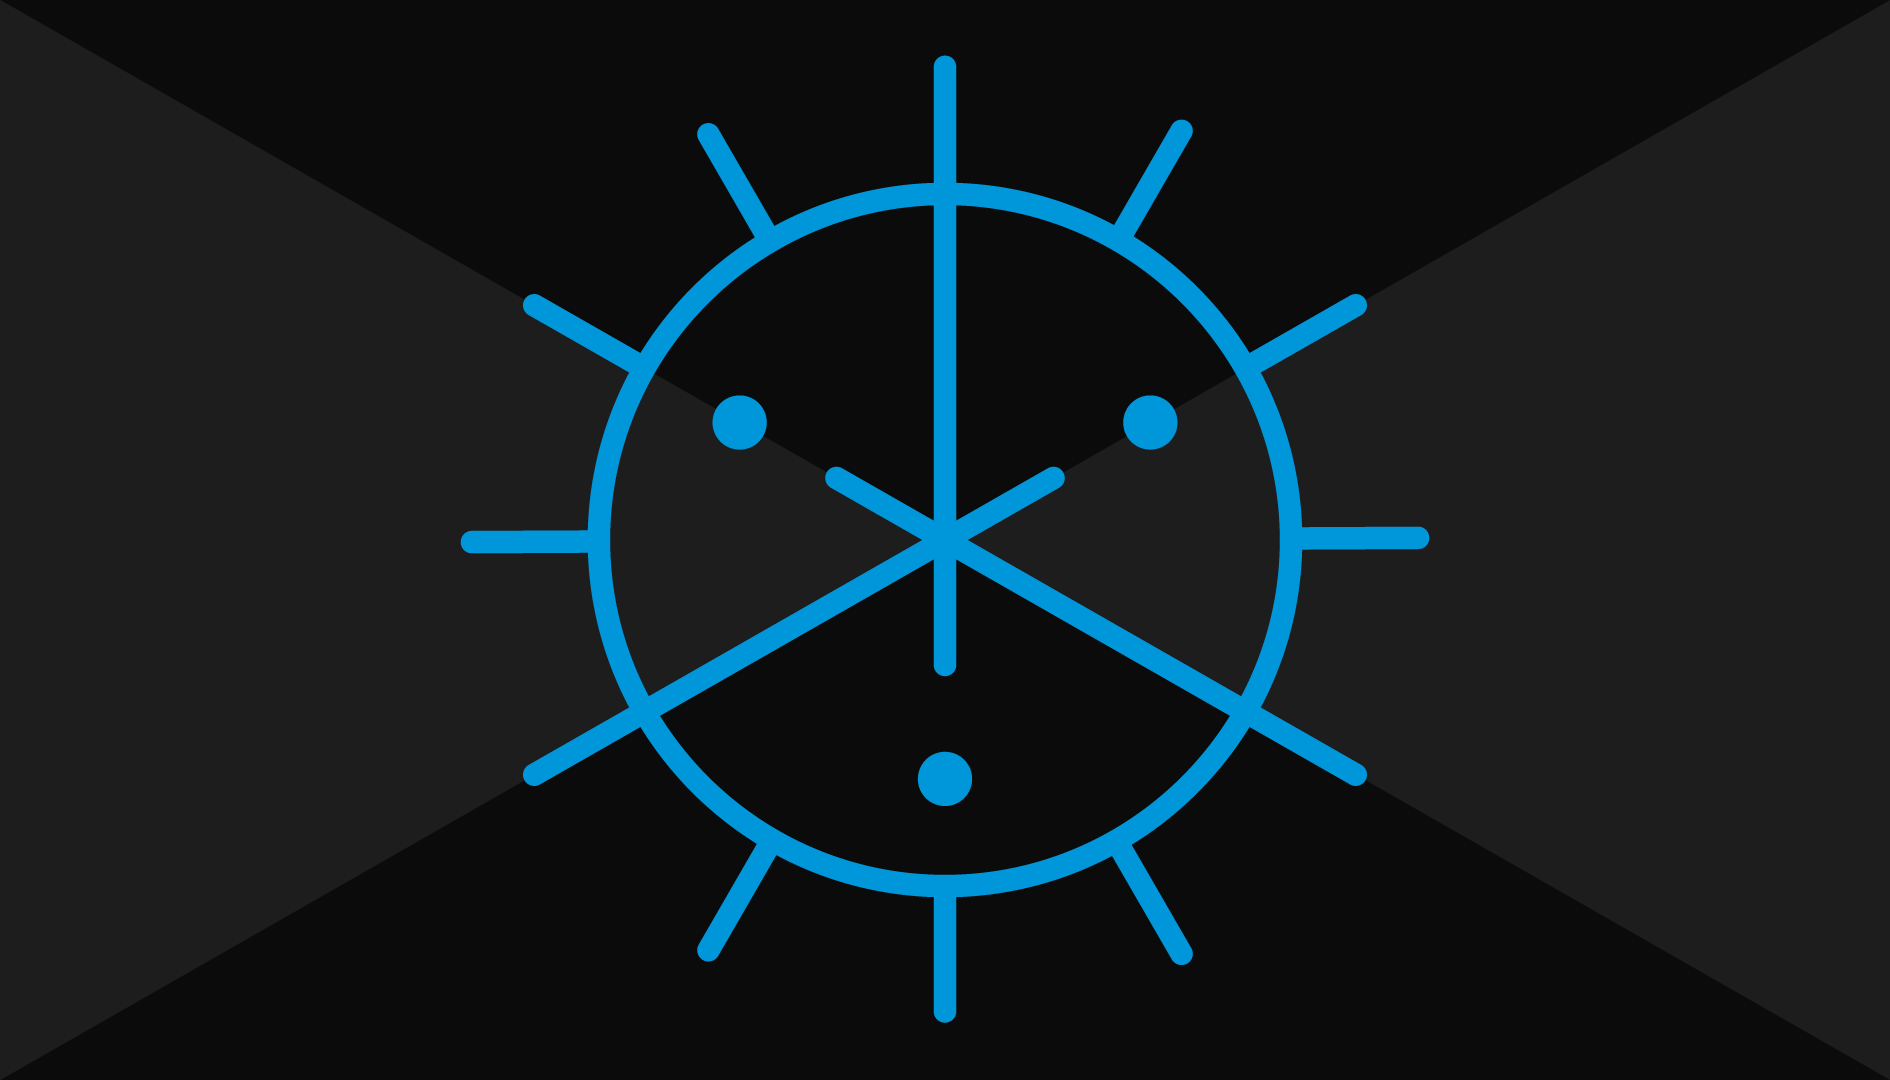 The Crest of Syntheticism: A circle of radioactive blue on a black background, trifurcated by three strokes that cross to form a tri-point in the center. Three round stars lie just off the ends of the points. The circumference of the circle is surrounded by twelve strokes spaced evenly around.